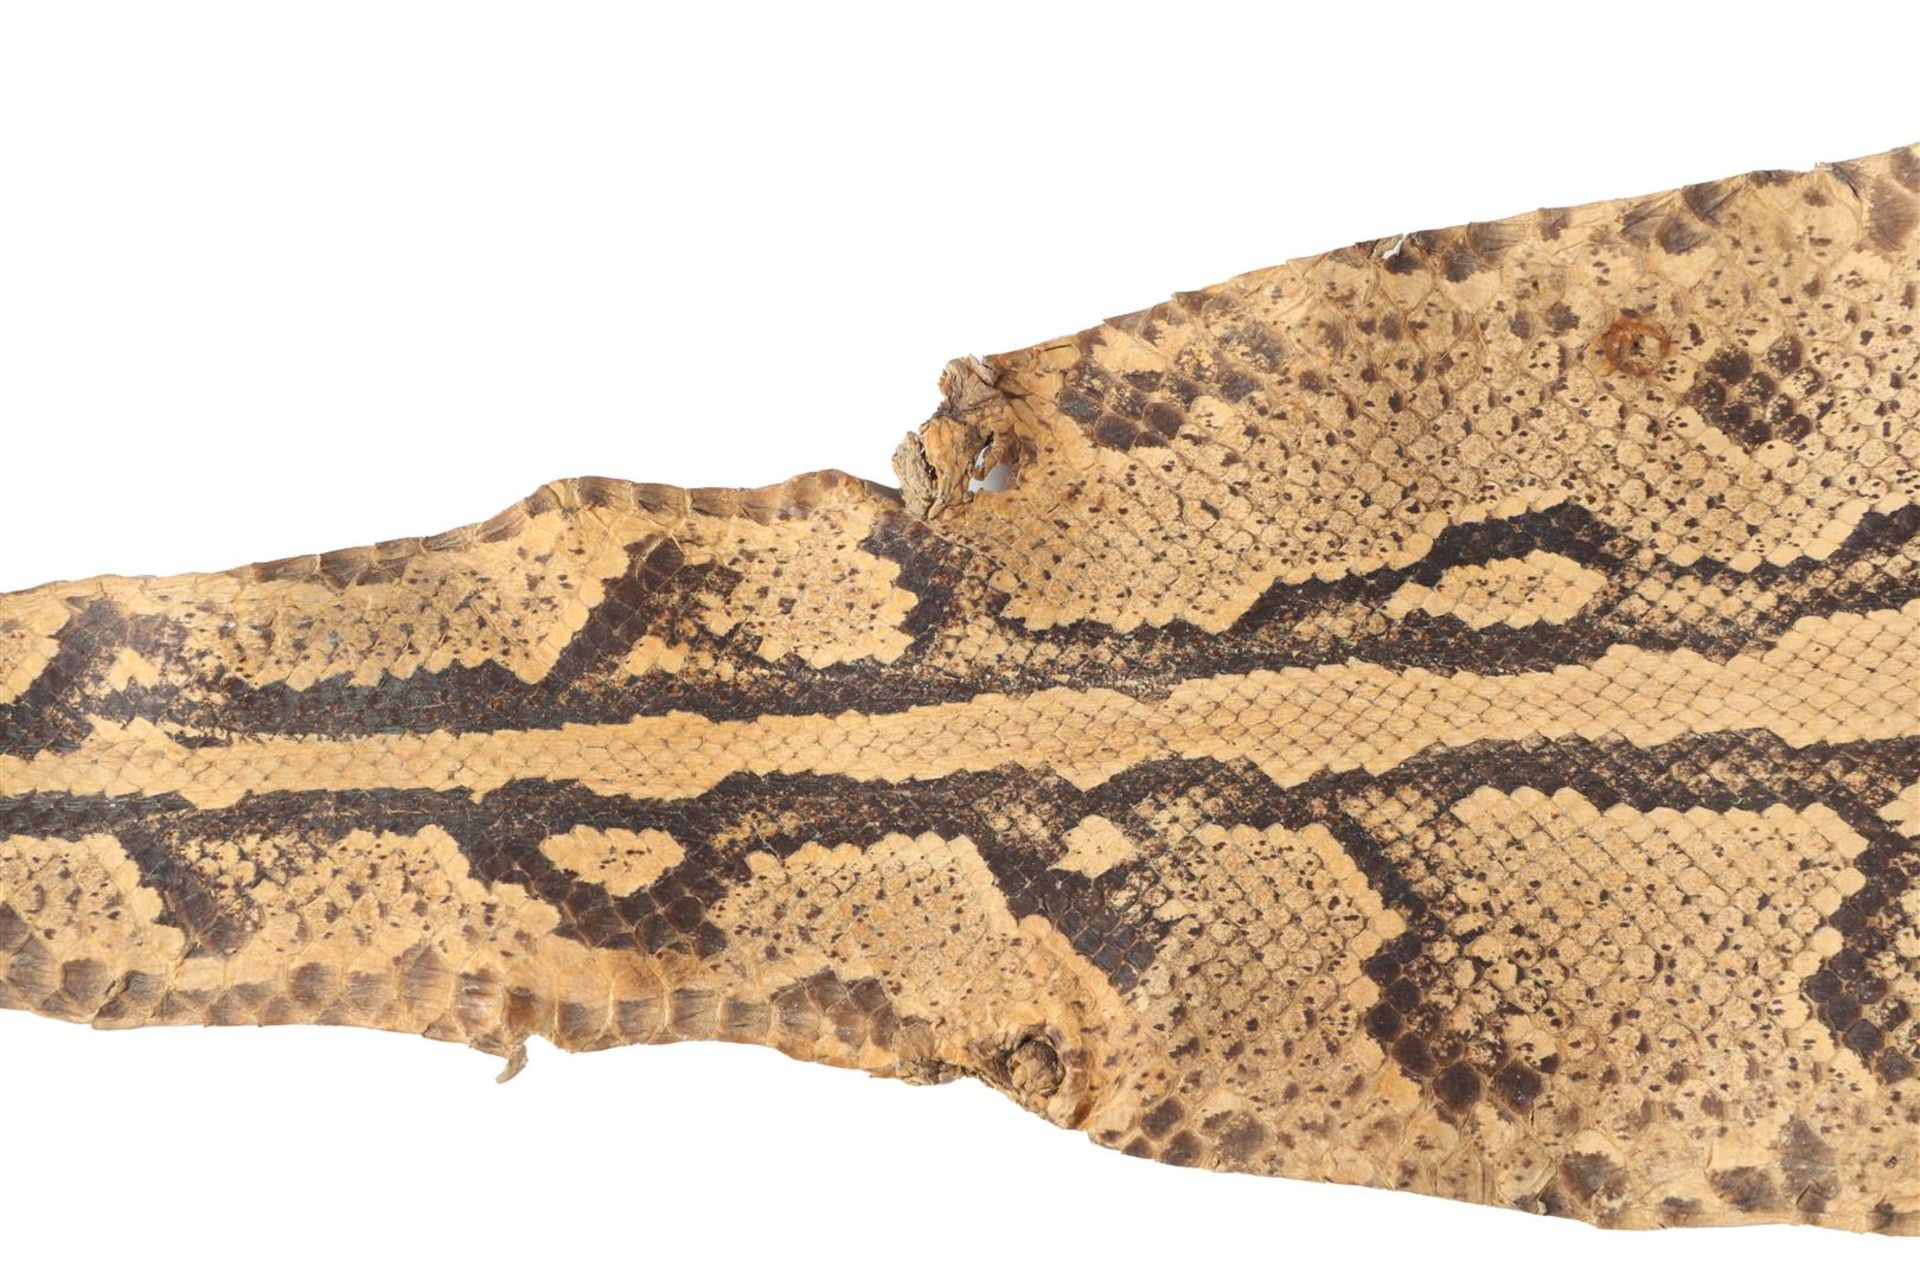 Skin of a python - Image 5 of 8